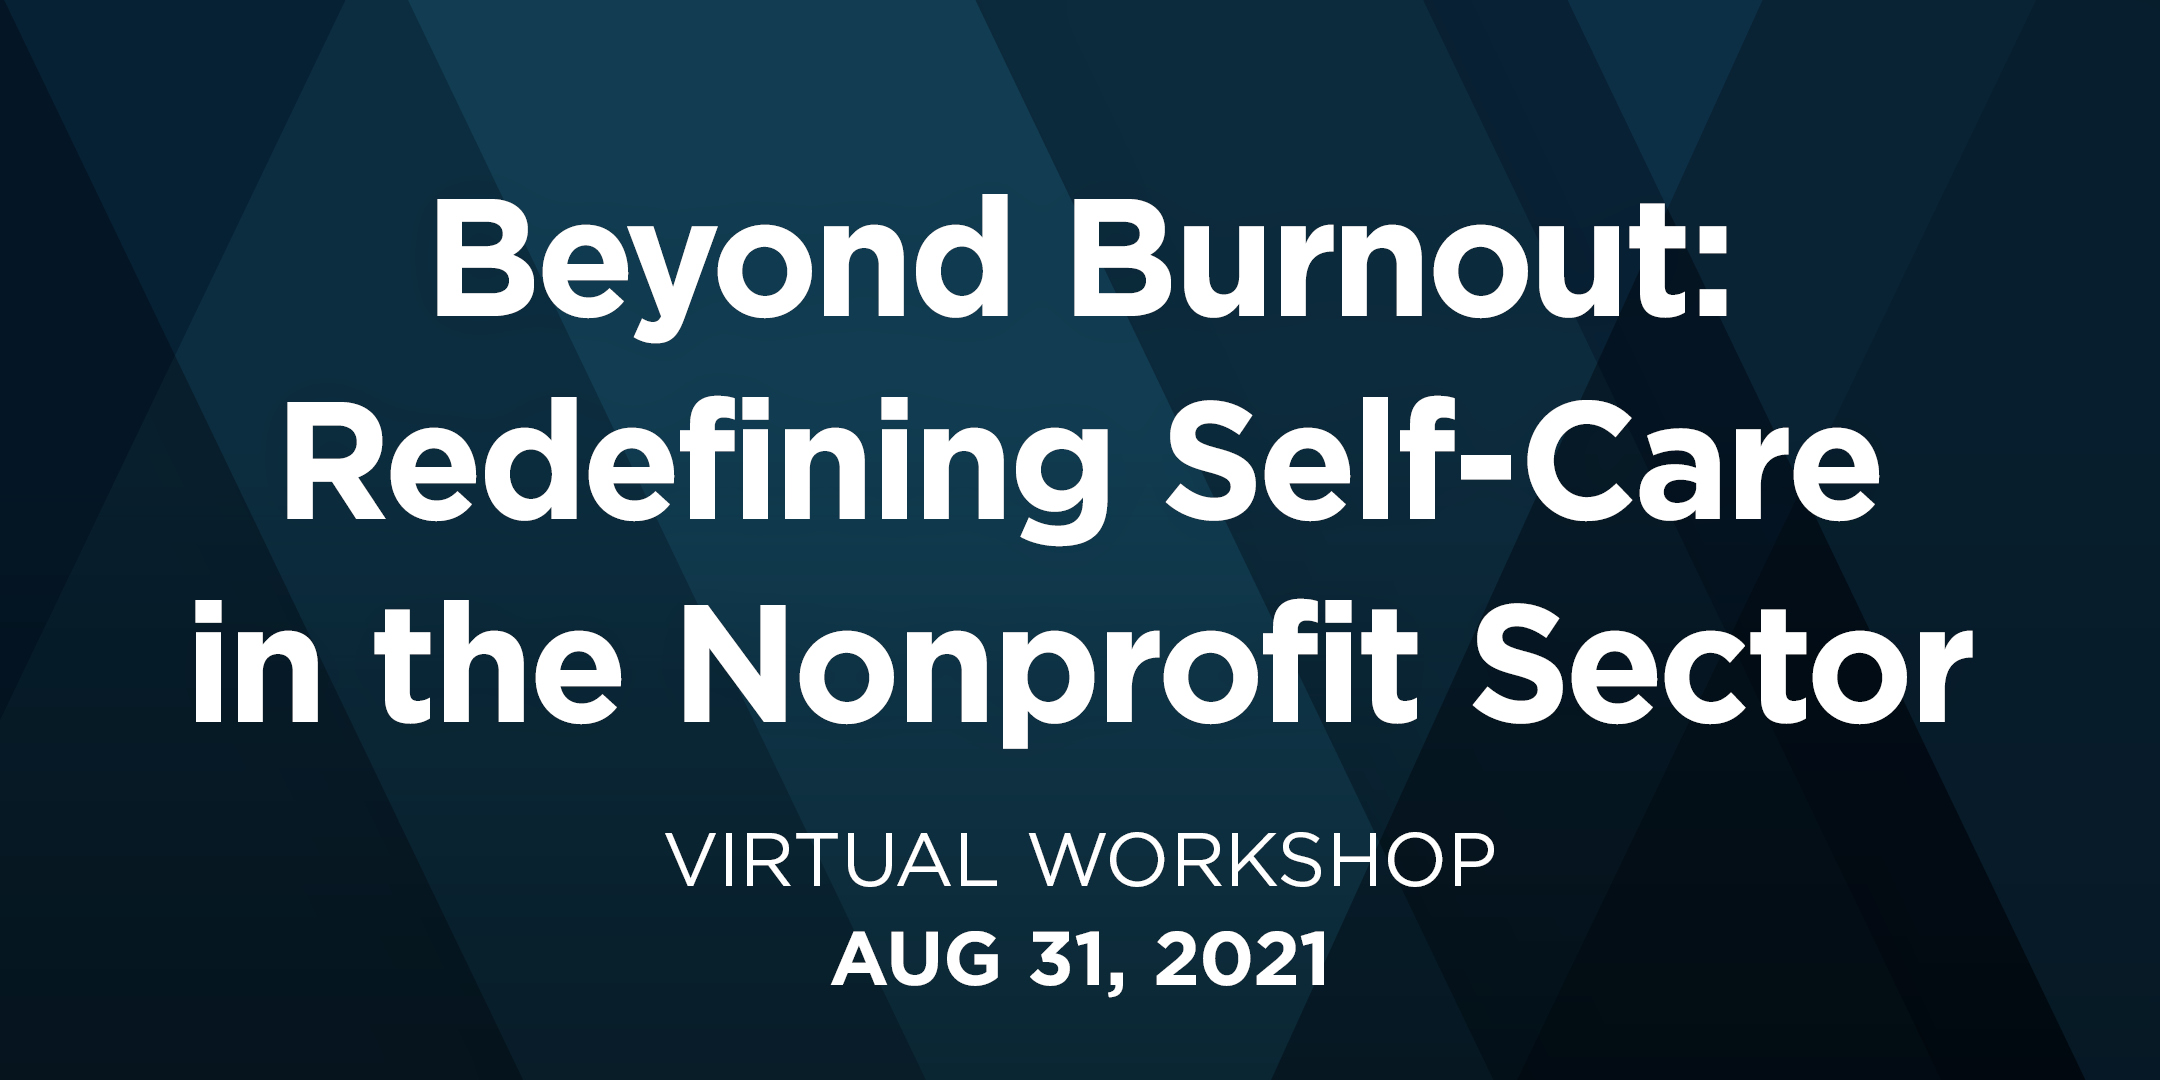 Beyond Burnout: Redefining Self-Care in the Nonprofit Sector